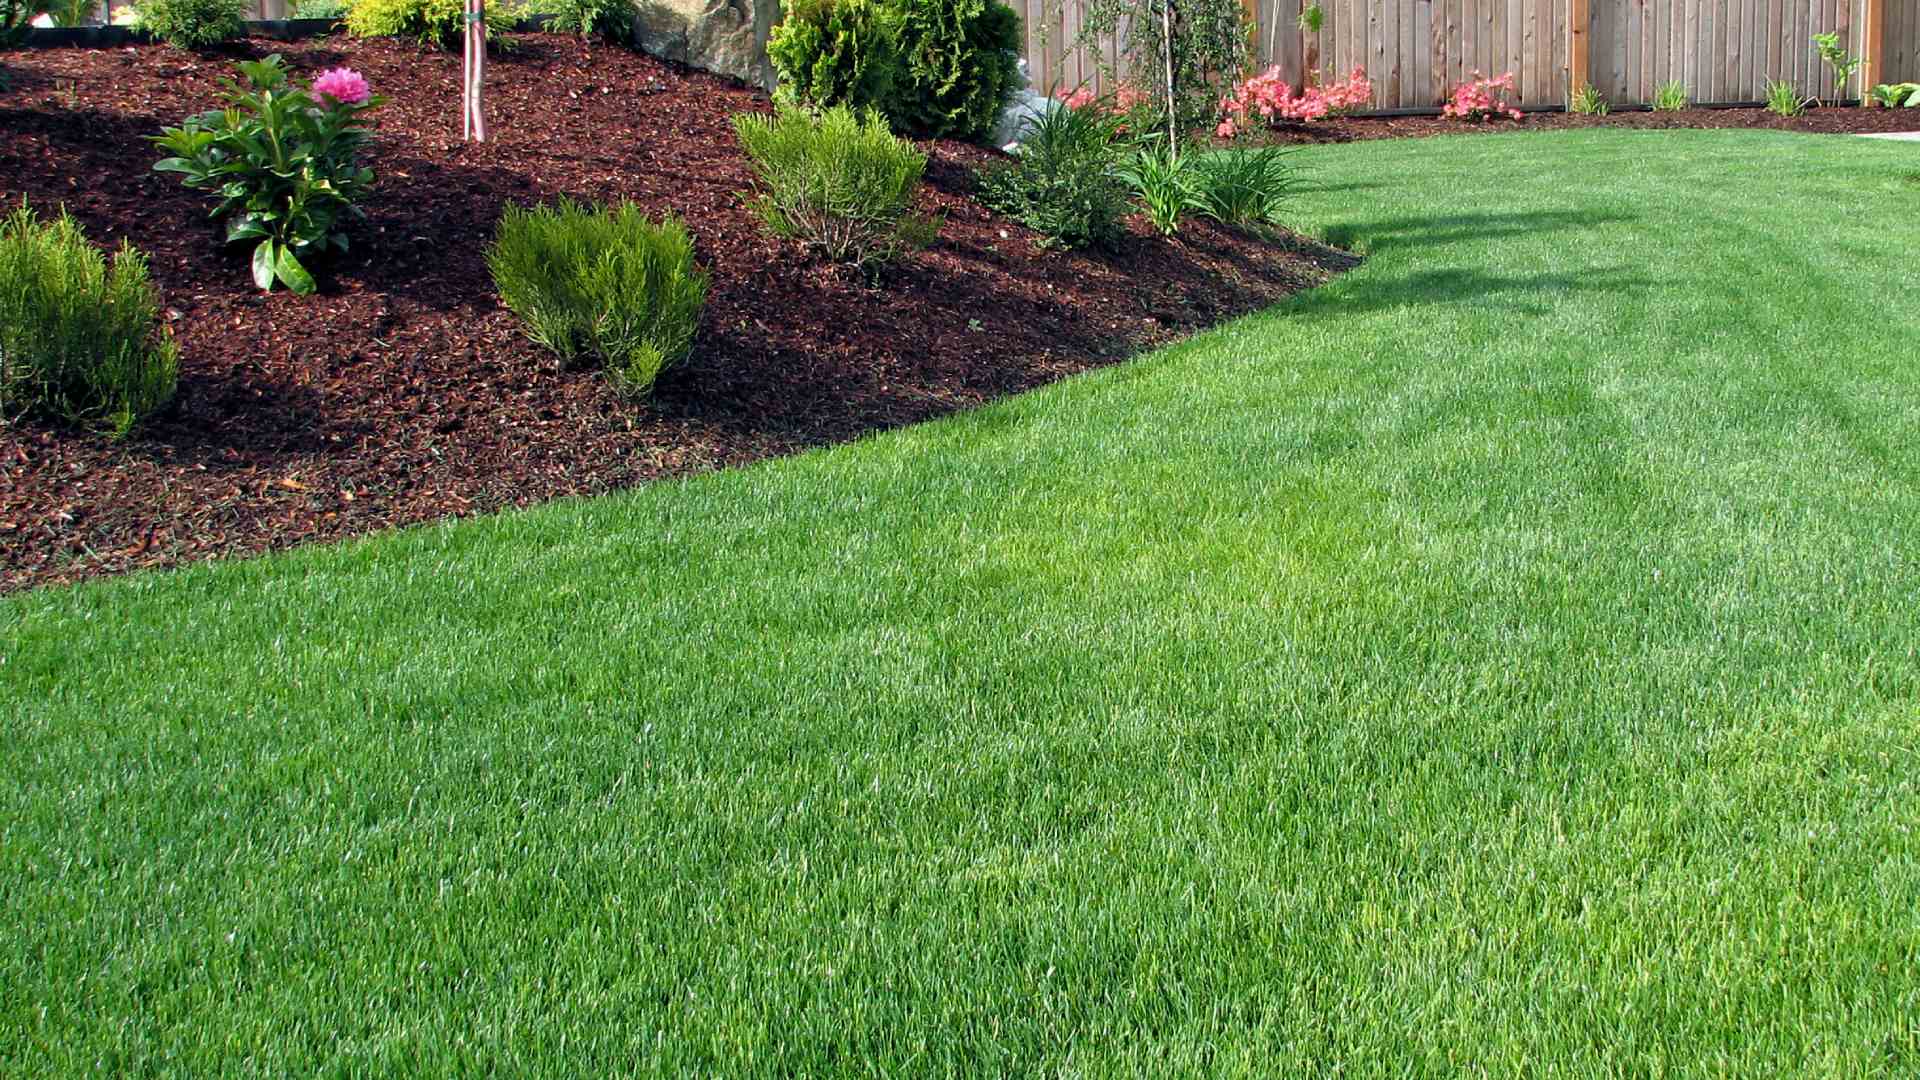 Healthy and maintained lawn in Zionsville, IN.